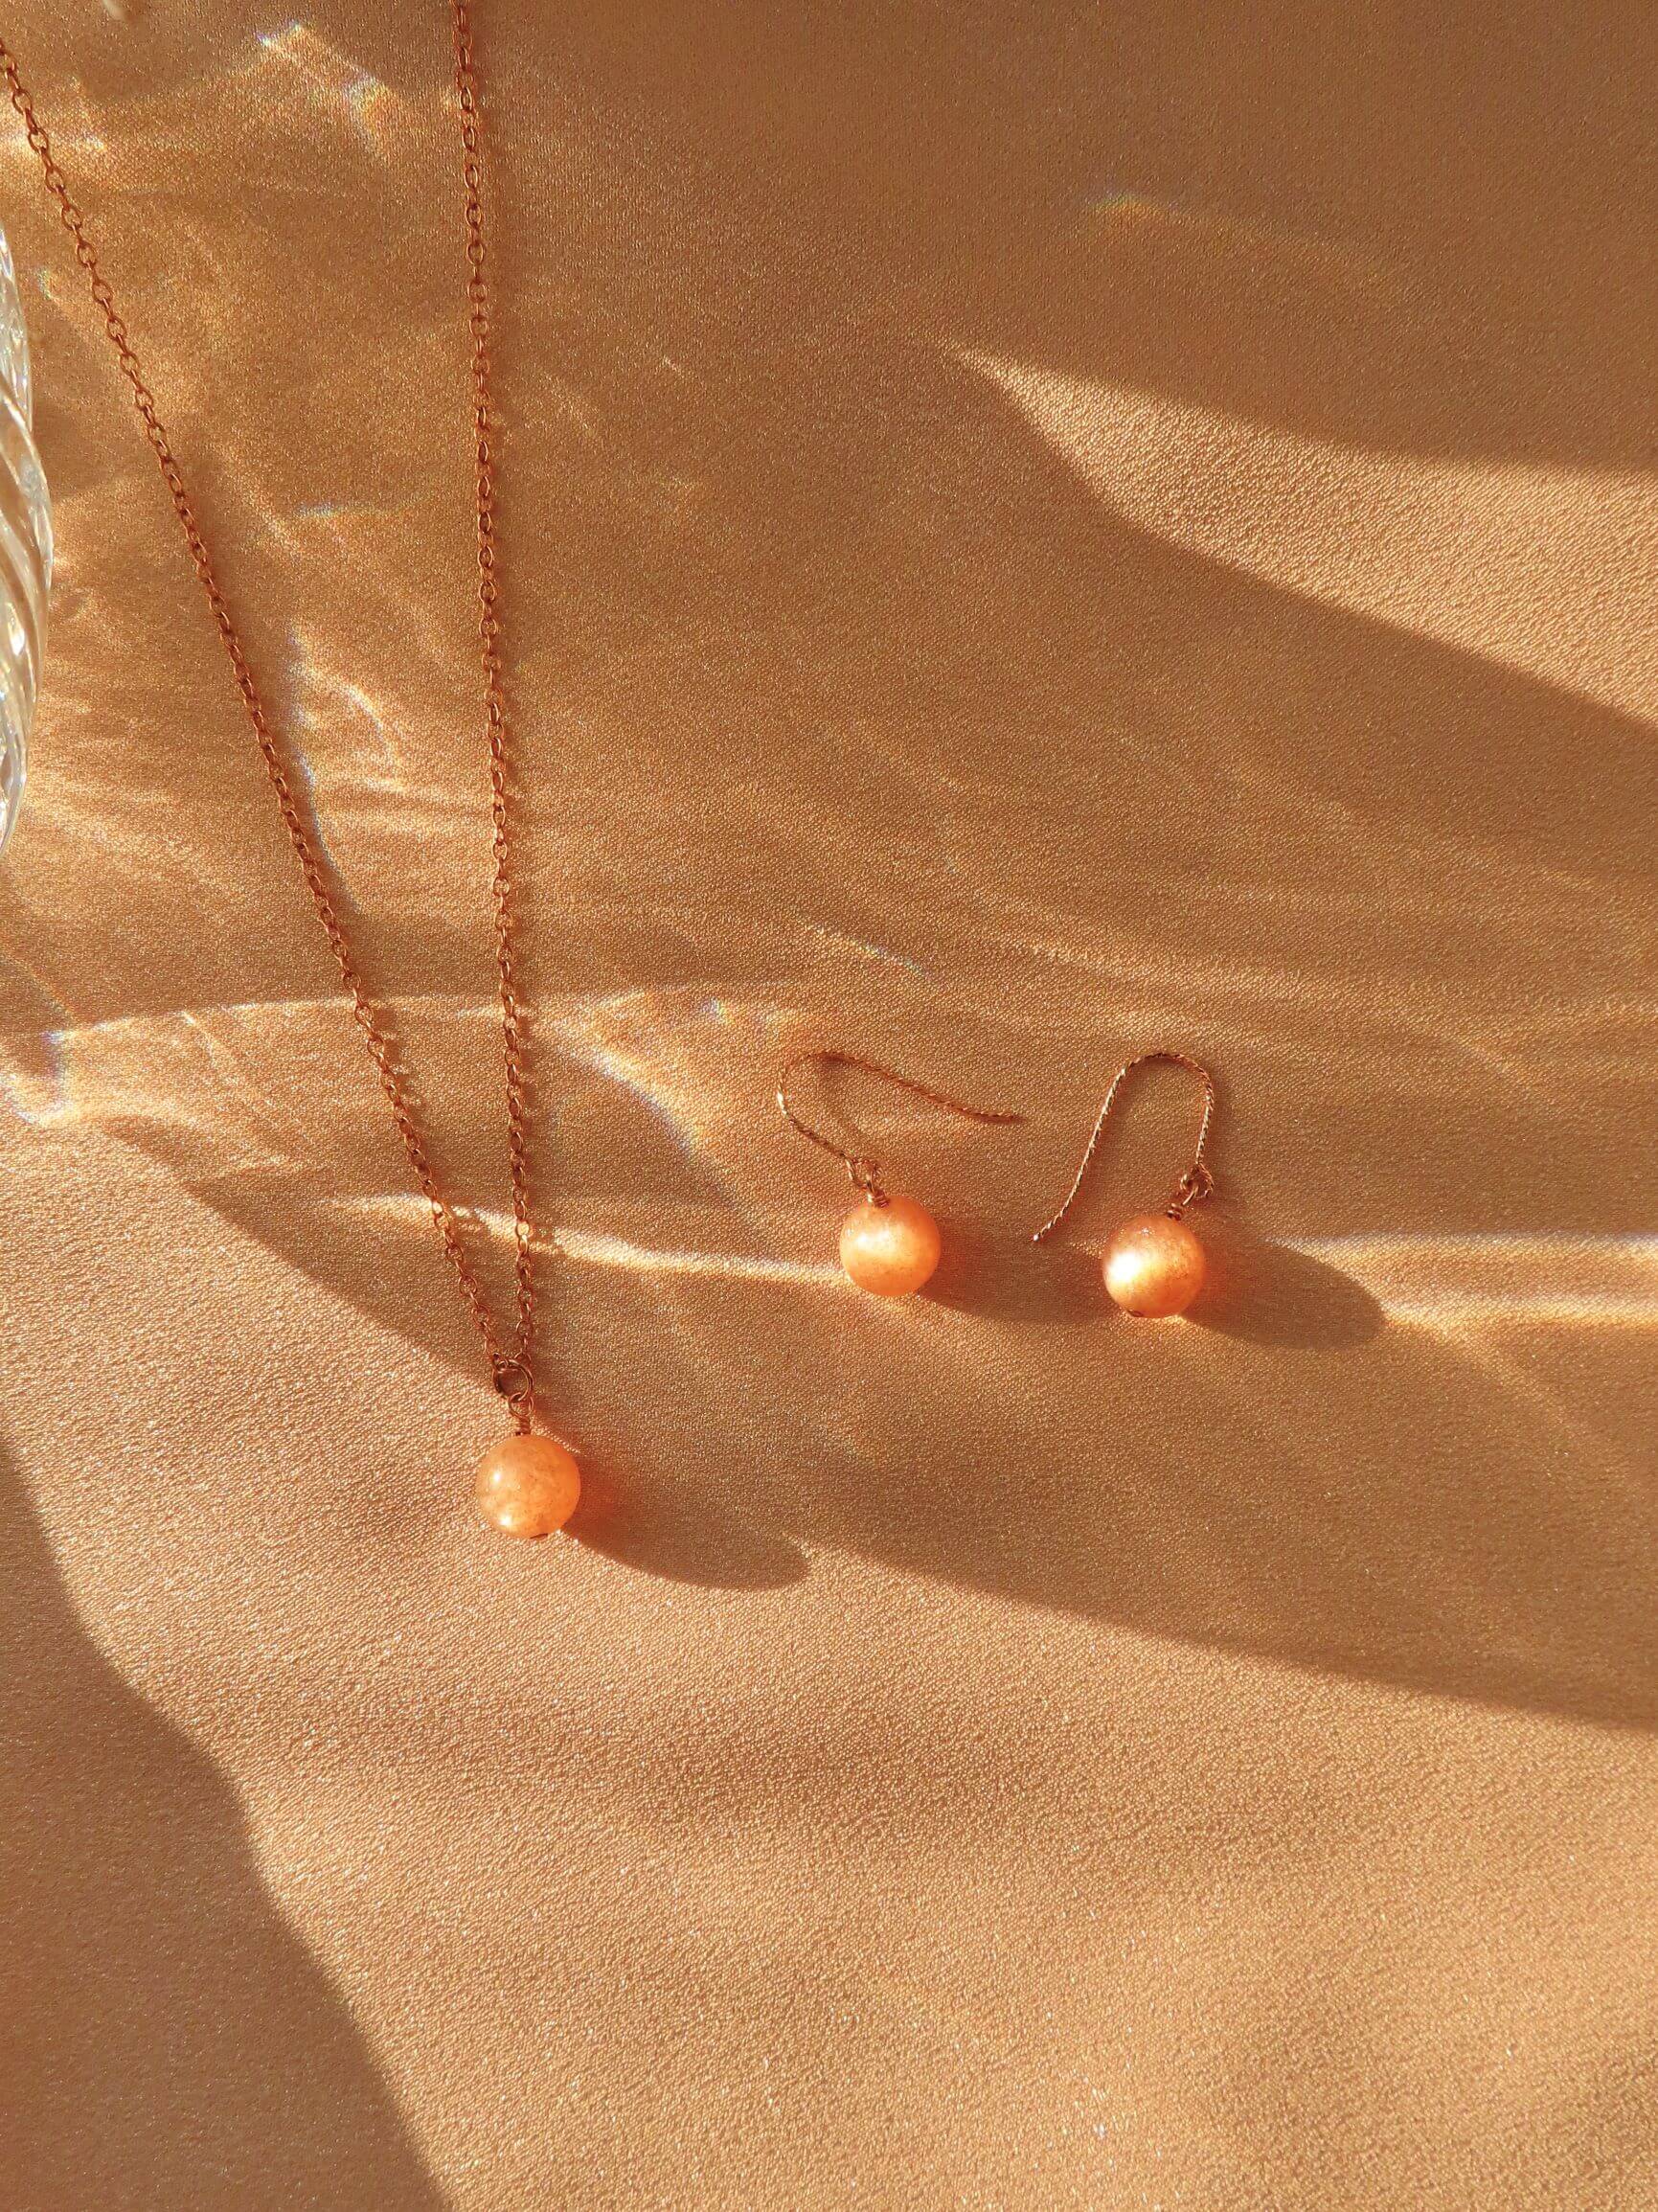 Sun Necklace & Earring Set - Rose Gold Filled-QuazarJewelry